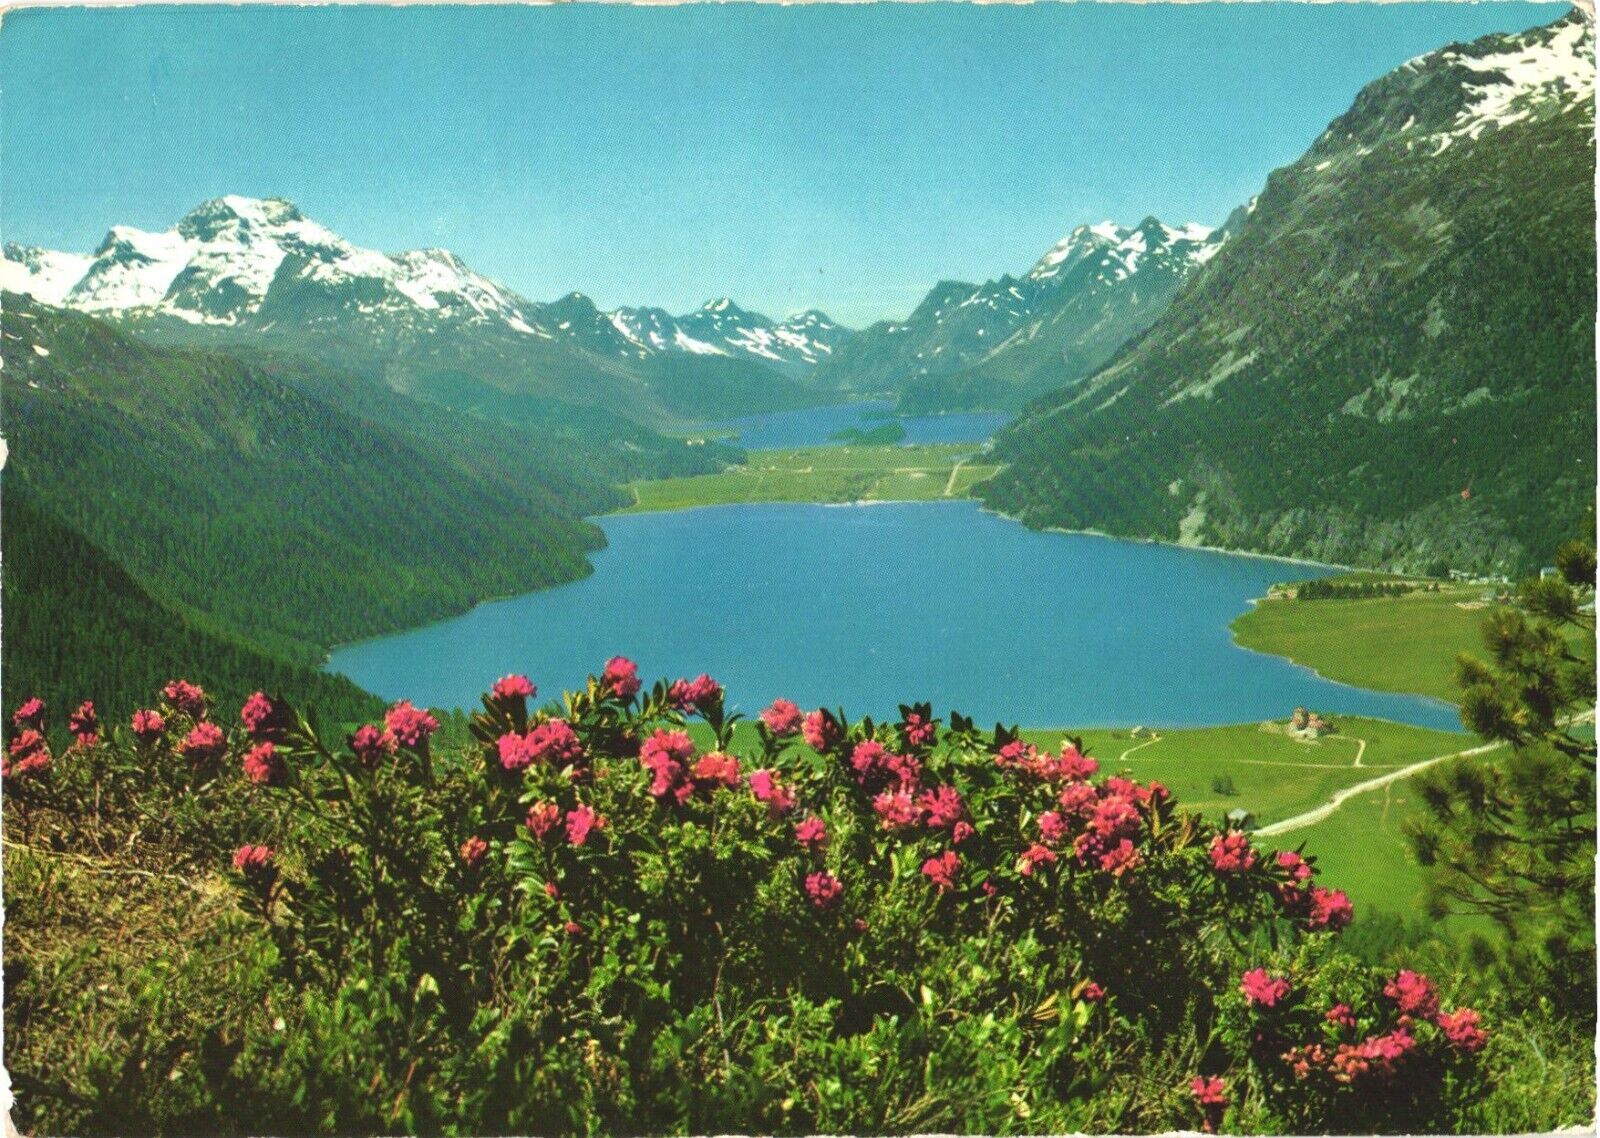 View of The Upper Engadine, Silvaplana and Lake Sils, Switzerland Postcard